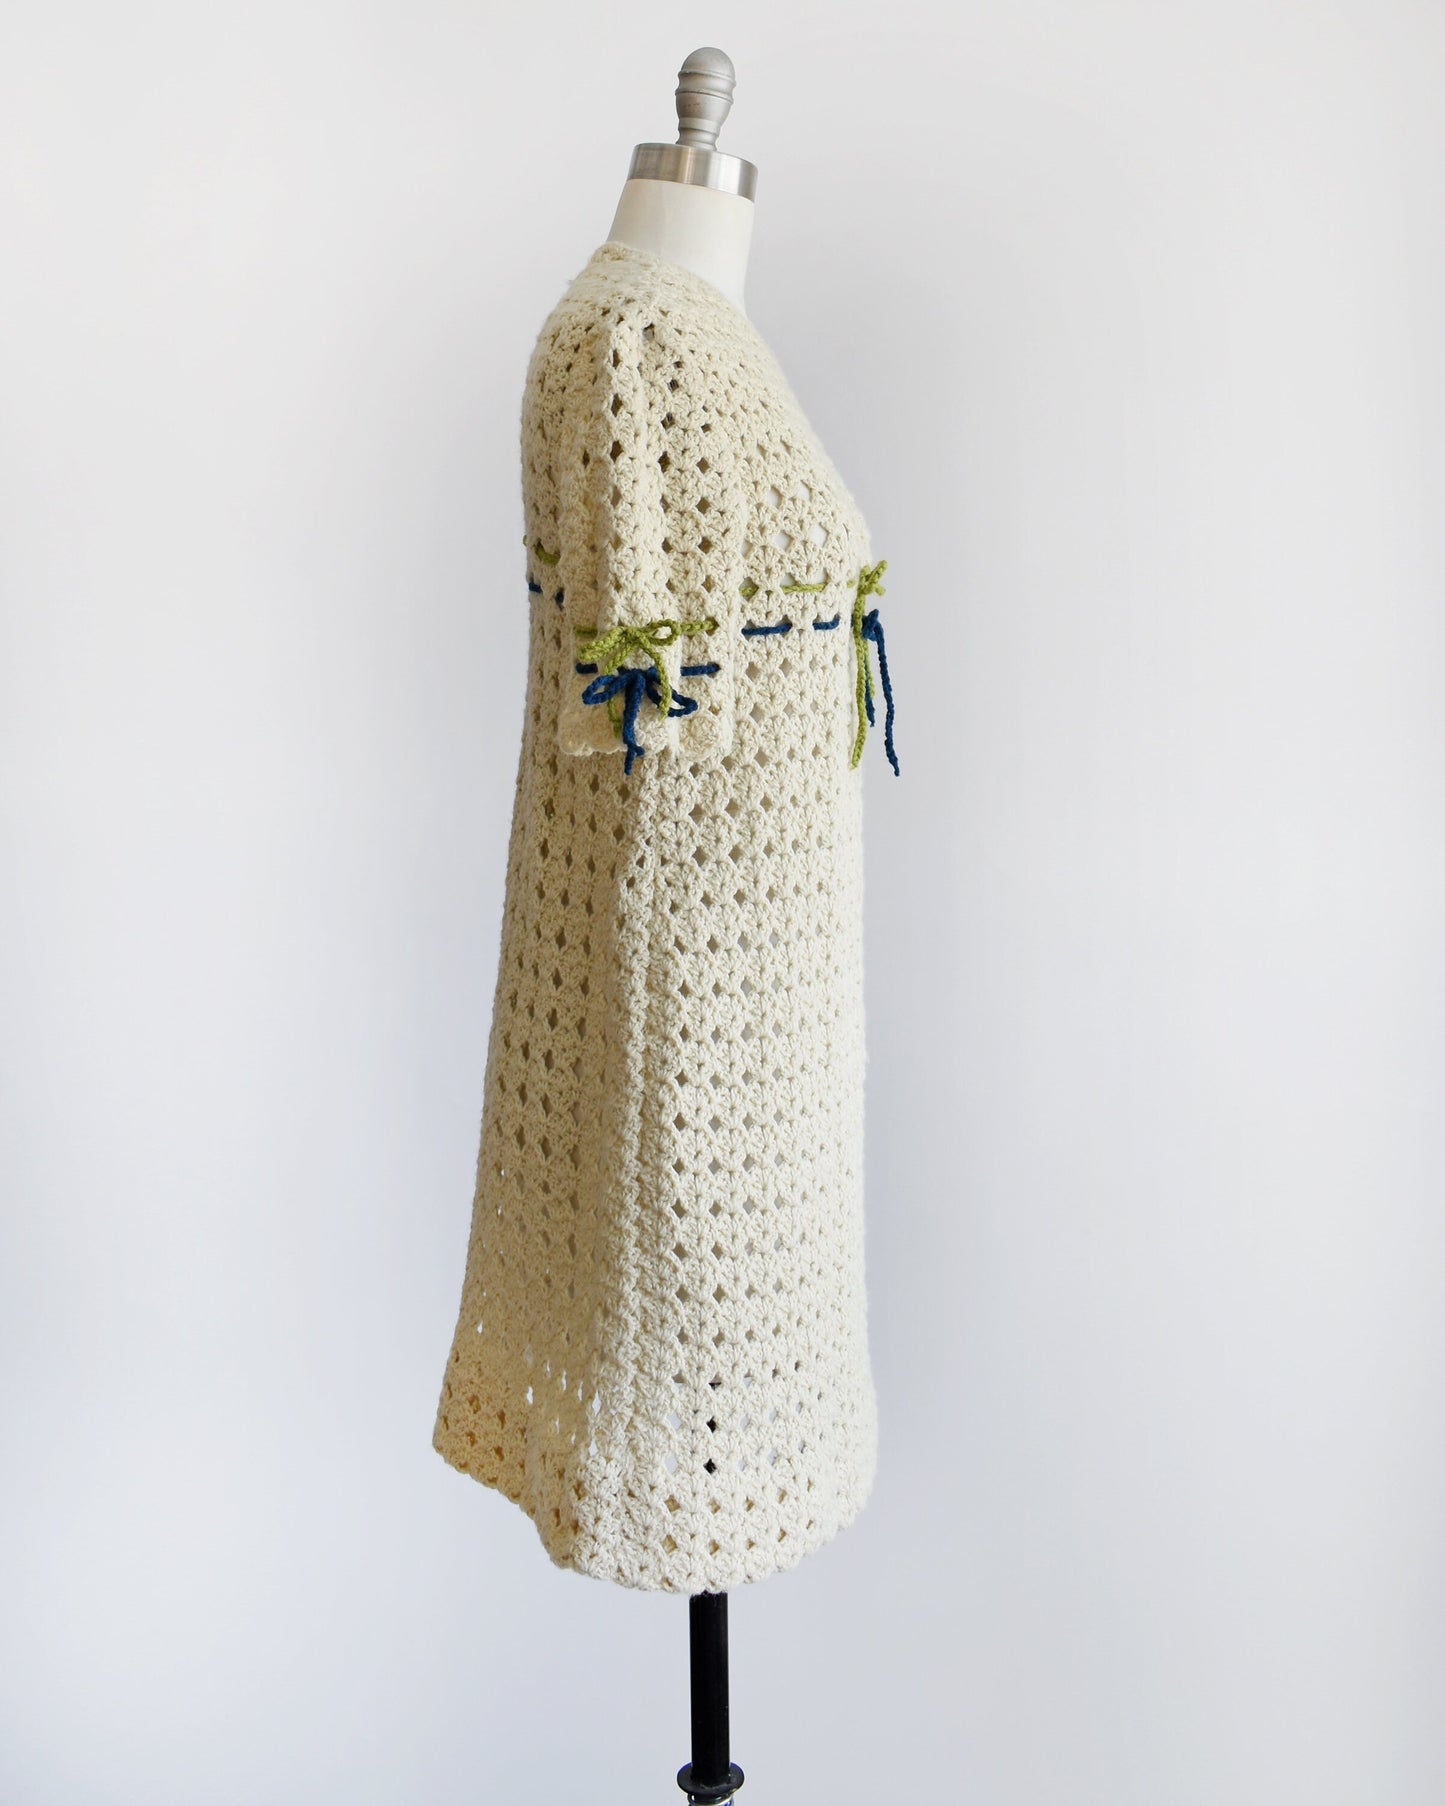 Side view of a vintage 70s crochet mini dress with a green and blue woven stripe on the front that ties into a bow, along with matching stripes and bows on the sleeves. The dress is on a dress form.